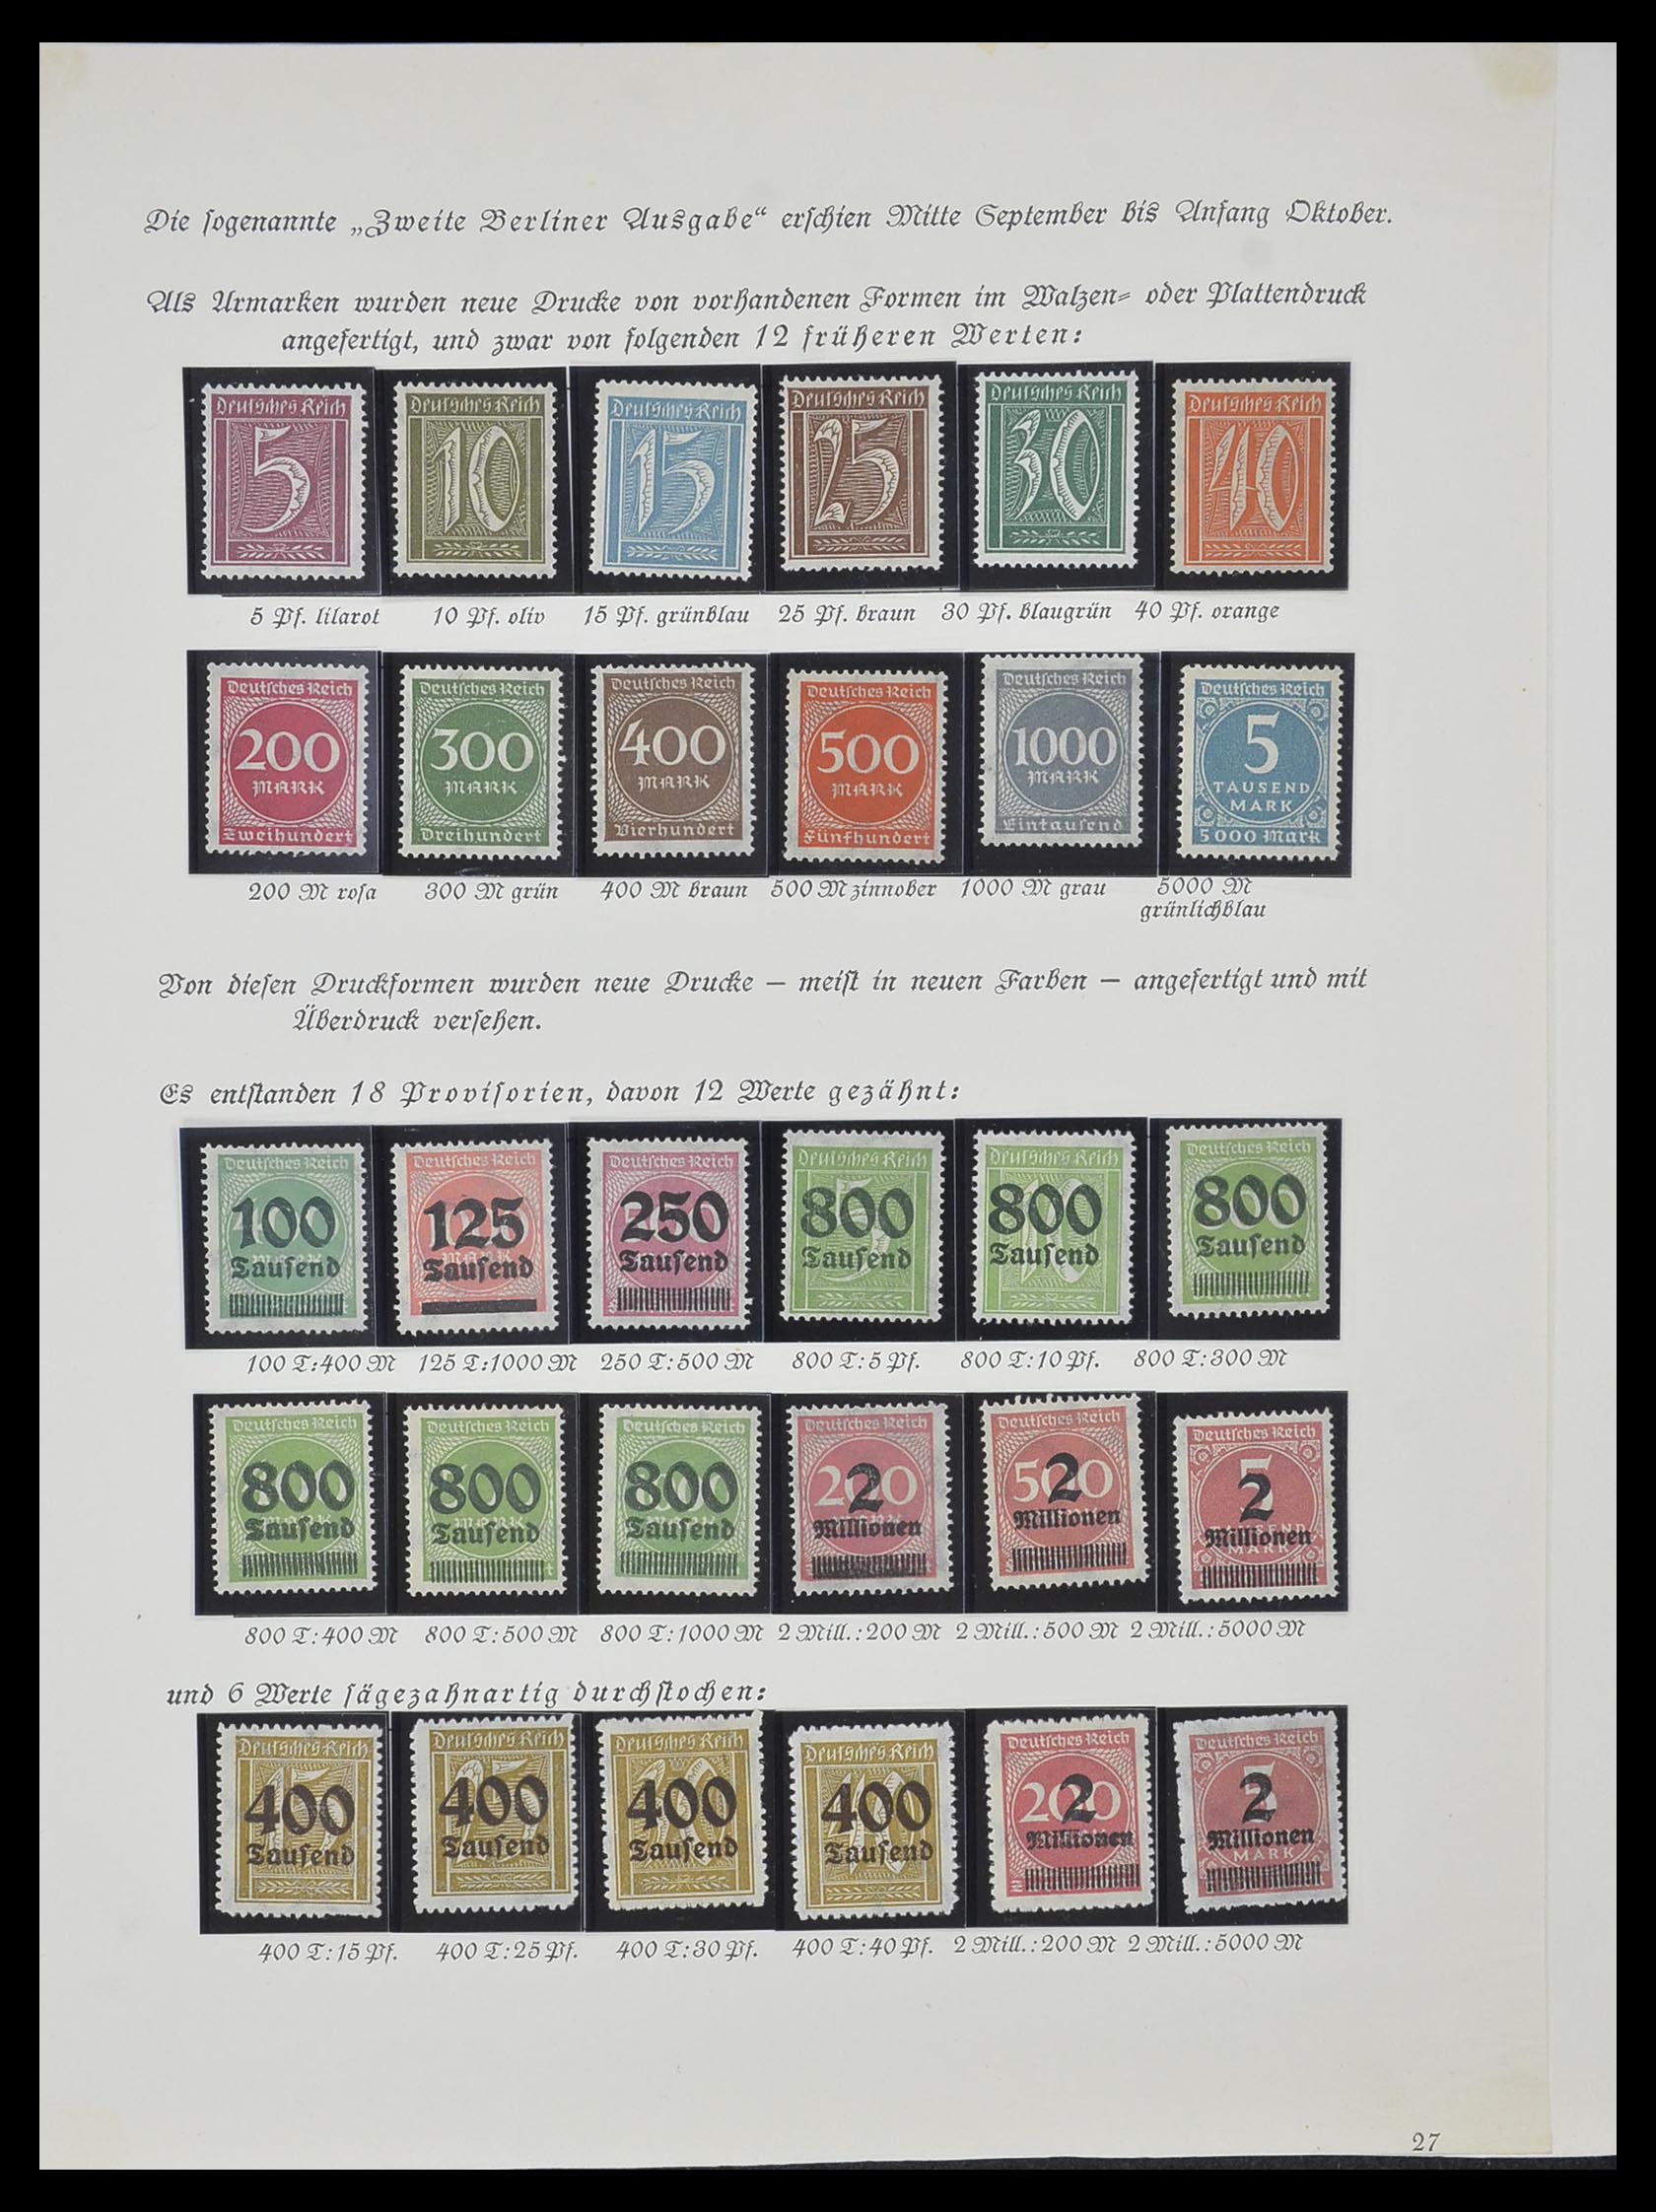 33957 011 - Stamp collection 33957 German Reich infla 1923.